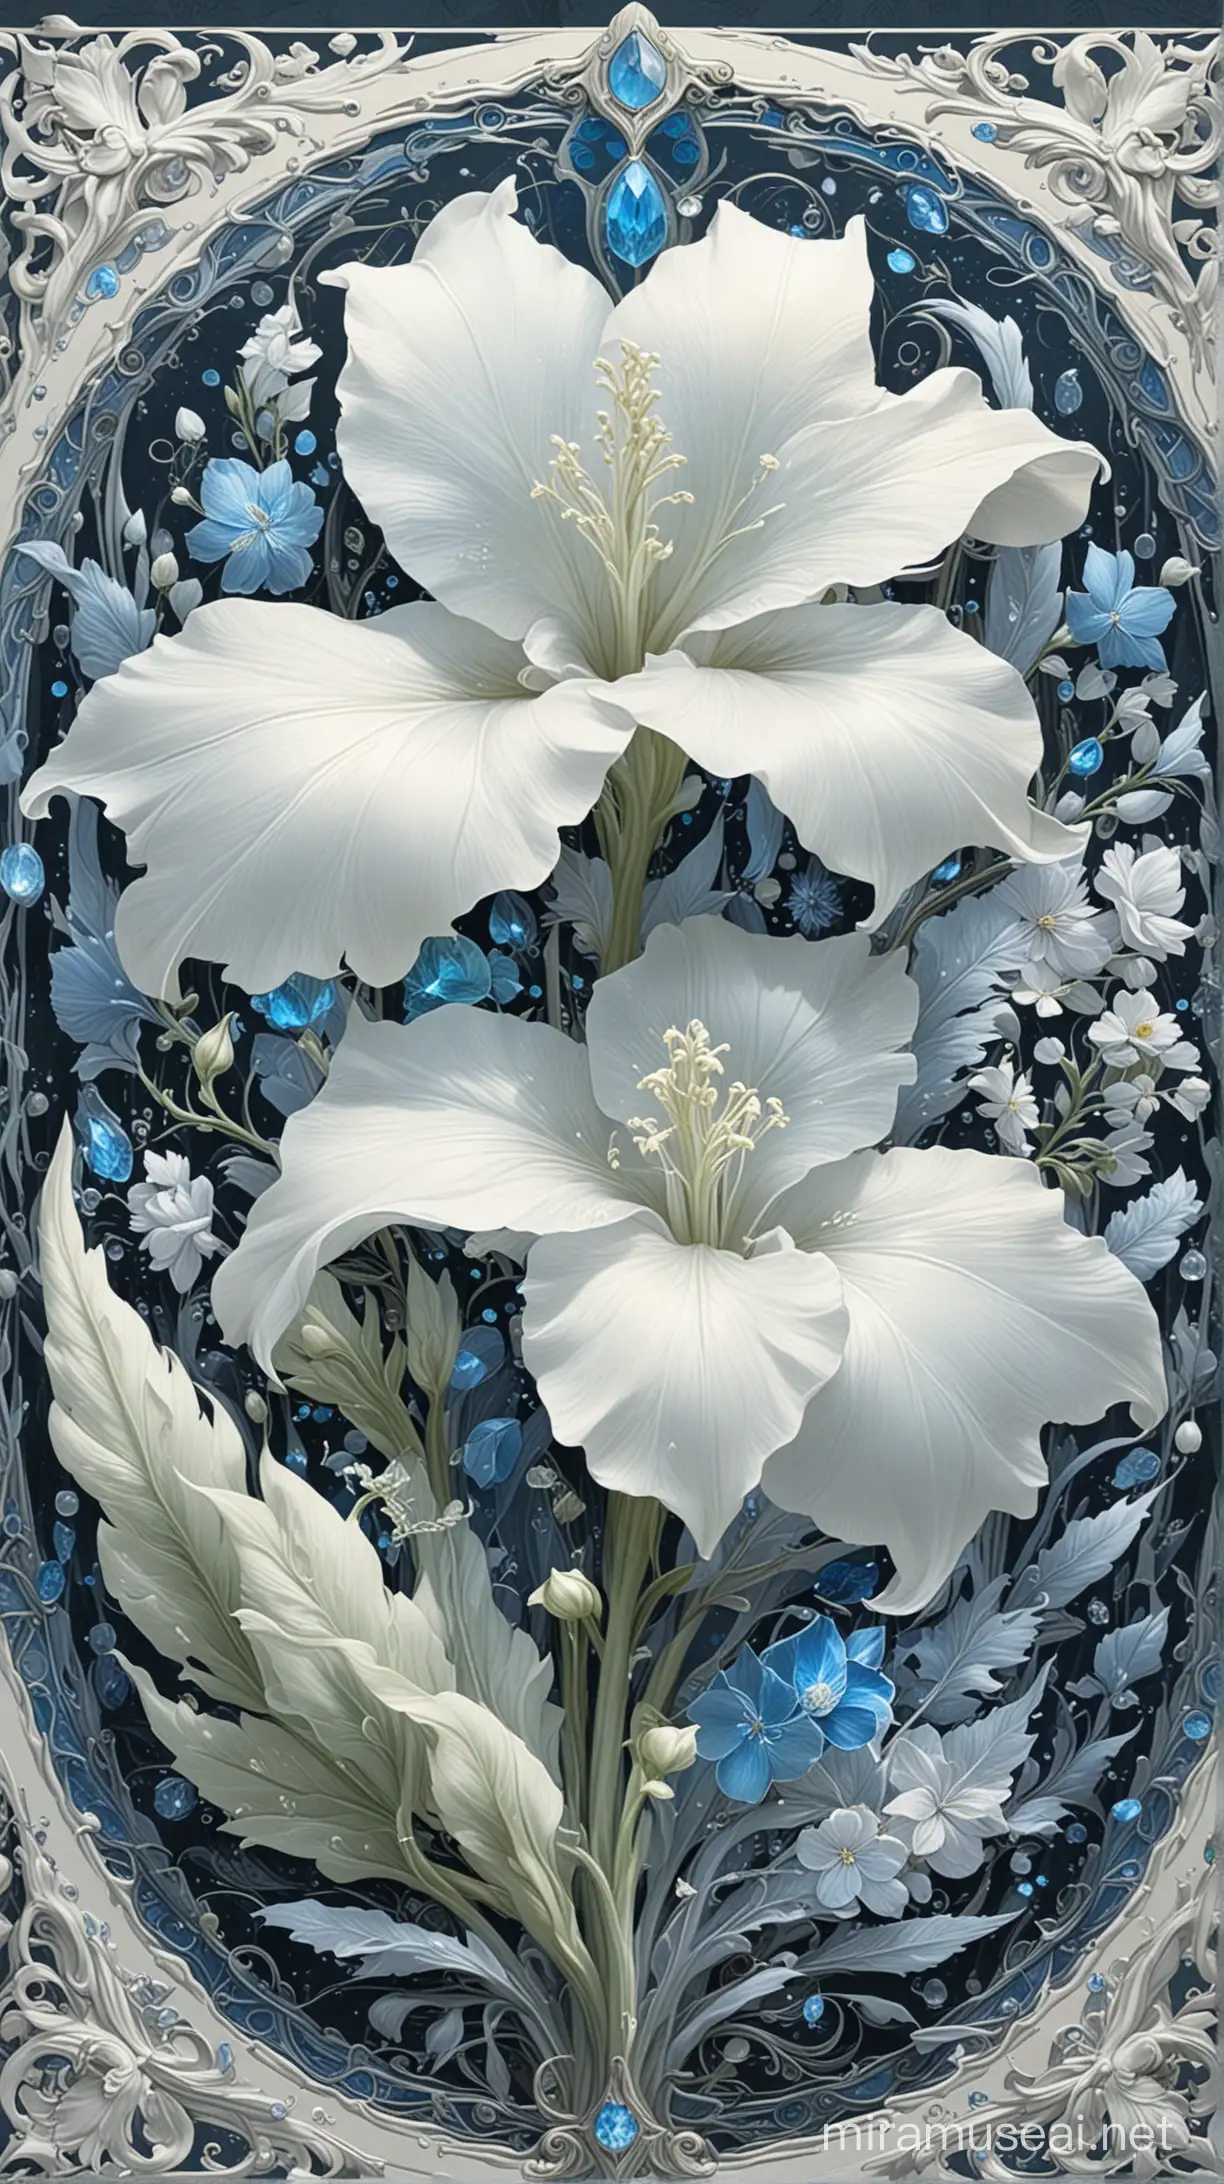 infographic of one morph bellflower artifact, full-length, specimens of ethereal white clear petals, very delicate and beautiful, FINAL FANTASY 10, white and blue gemstone decoration, lithograph, good design sense, fresh dreamy colors, highly detailed, Art Nouveau style illustration, oil-color on canvas